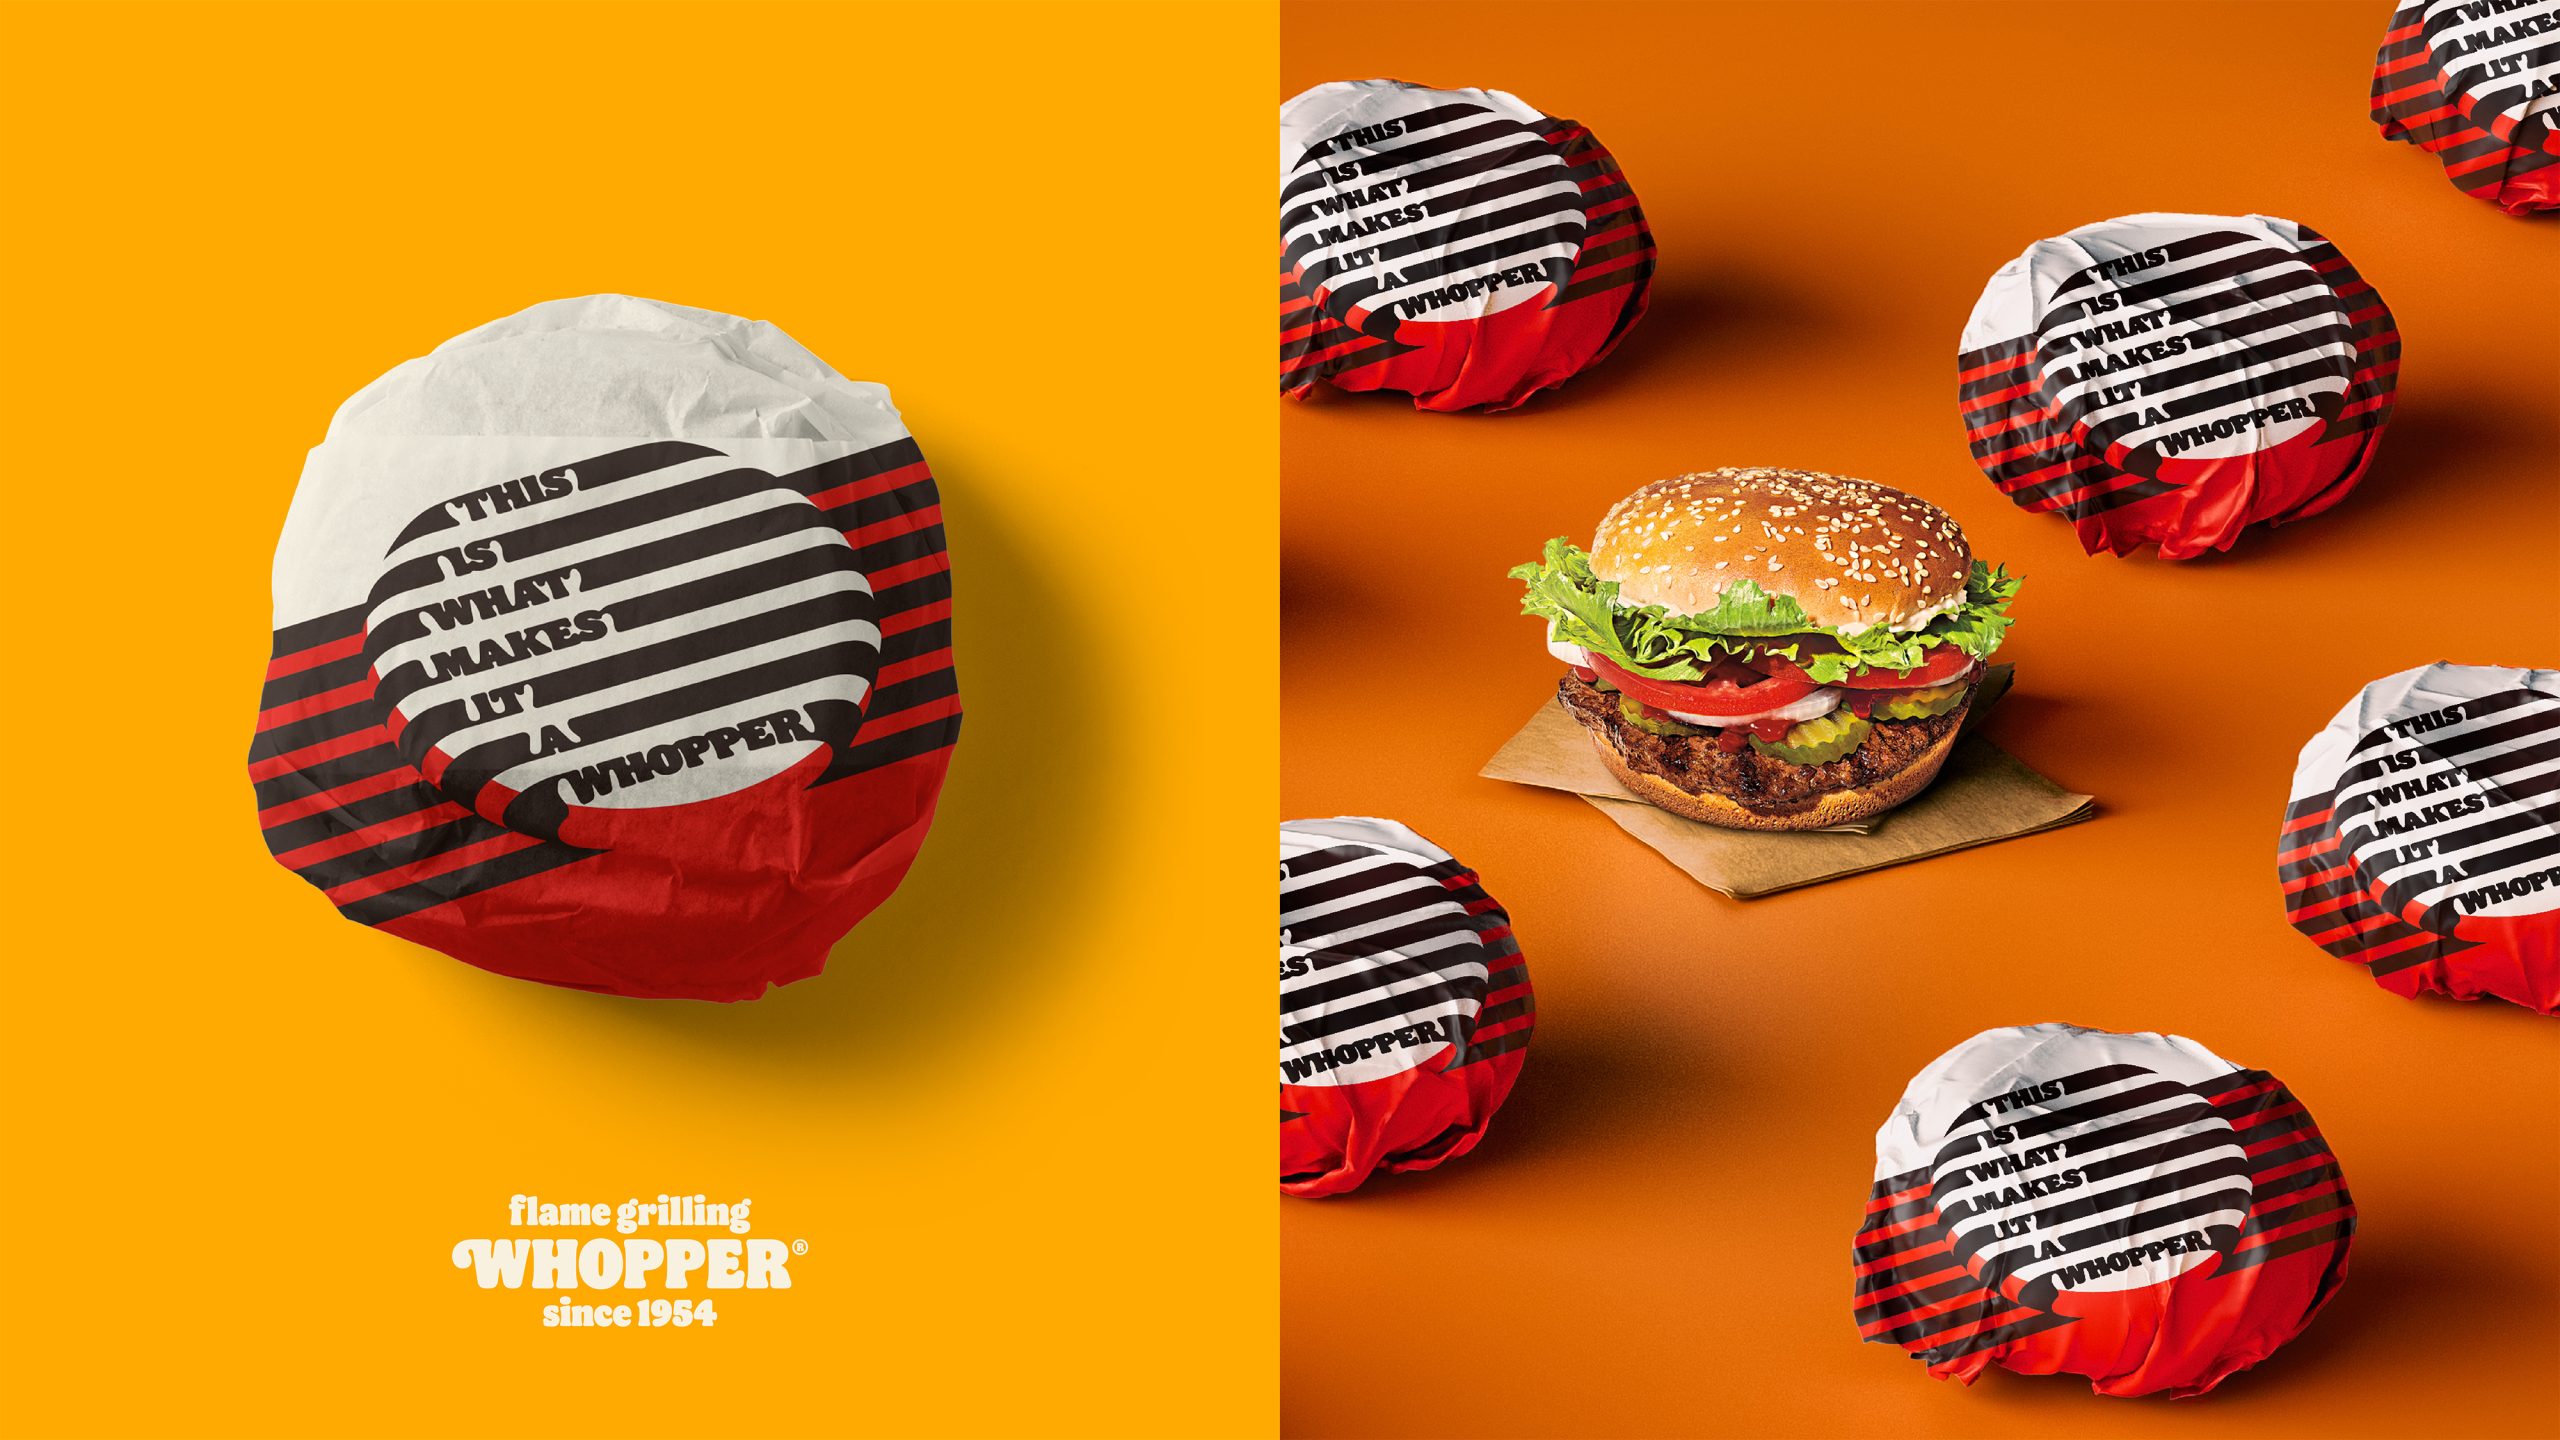 BBH PUTS THE BURGER KING WHOPPER'S FAMOUS FLAME GRILL LINES AT THE